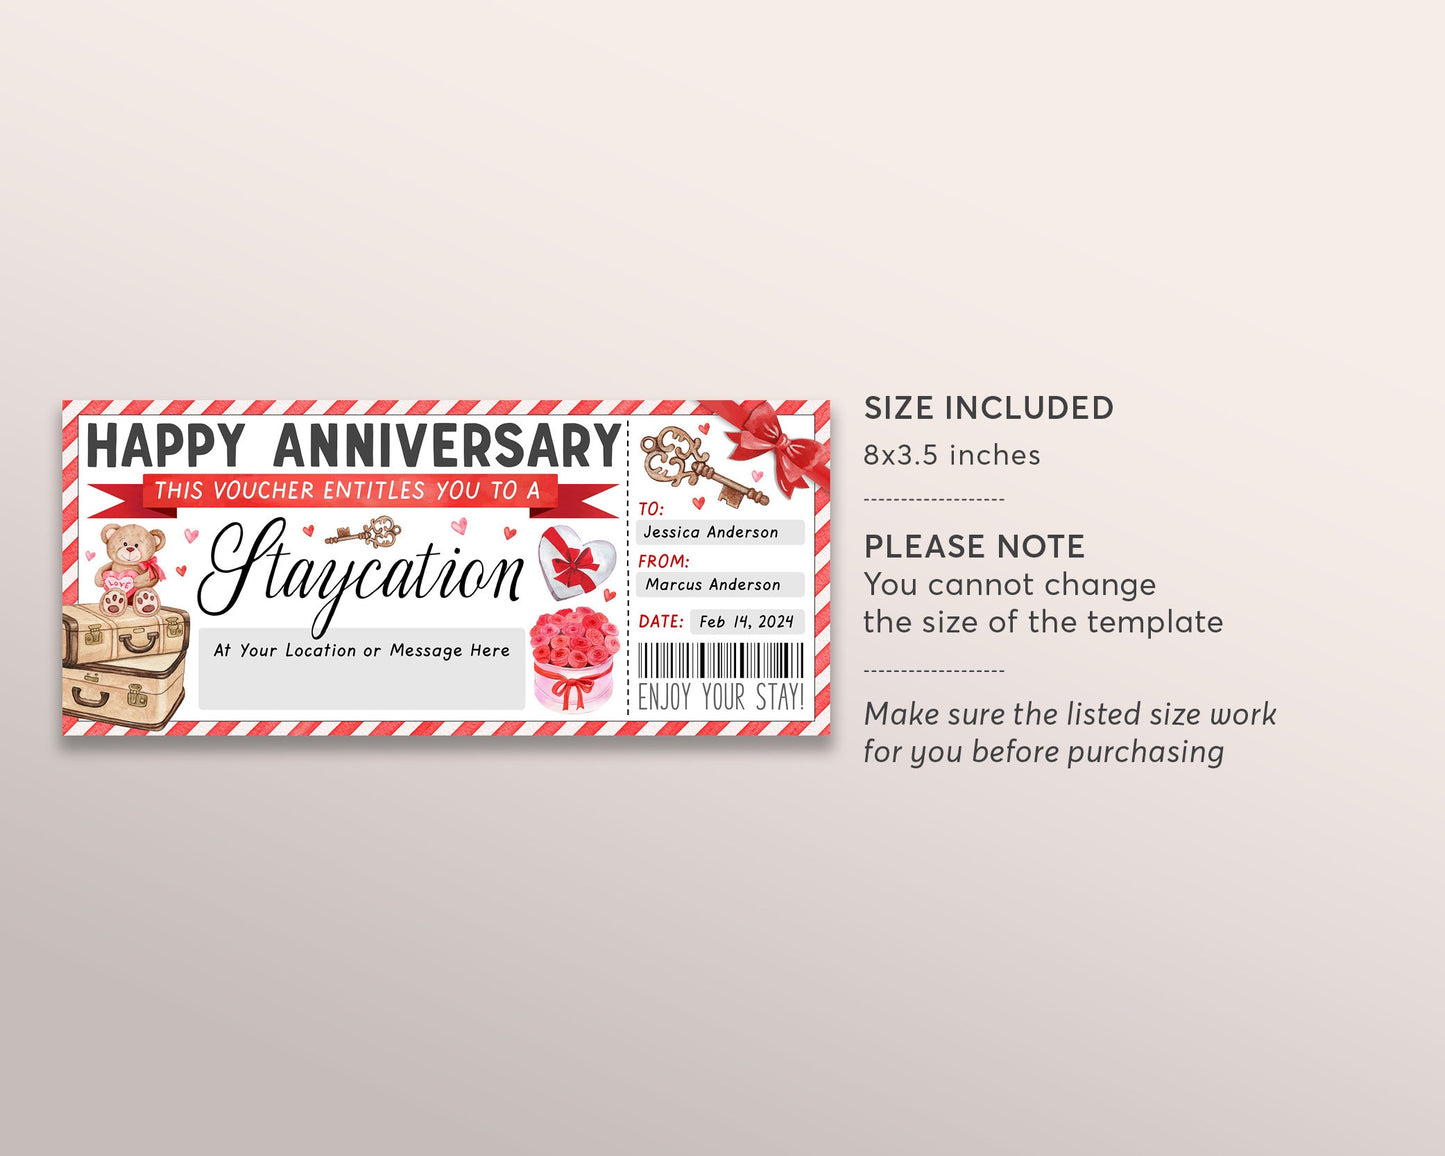 Surprise Staycation Voucher Editable Template, Wedding Anniversary Weekend Getaway Hotel Ticket Gift Certificate Reveal For Husband Wife